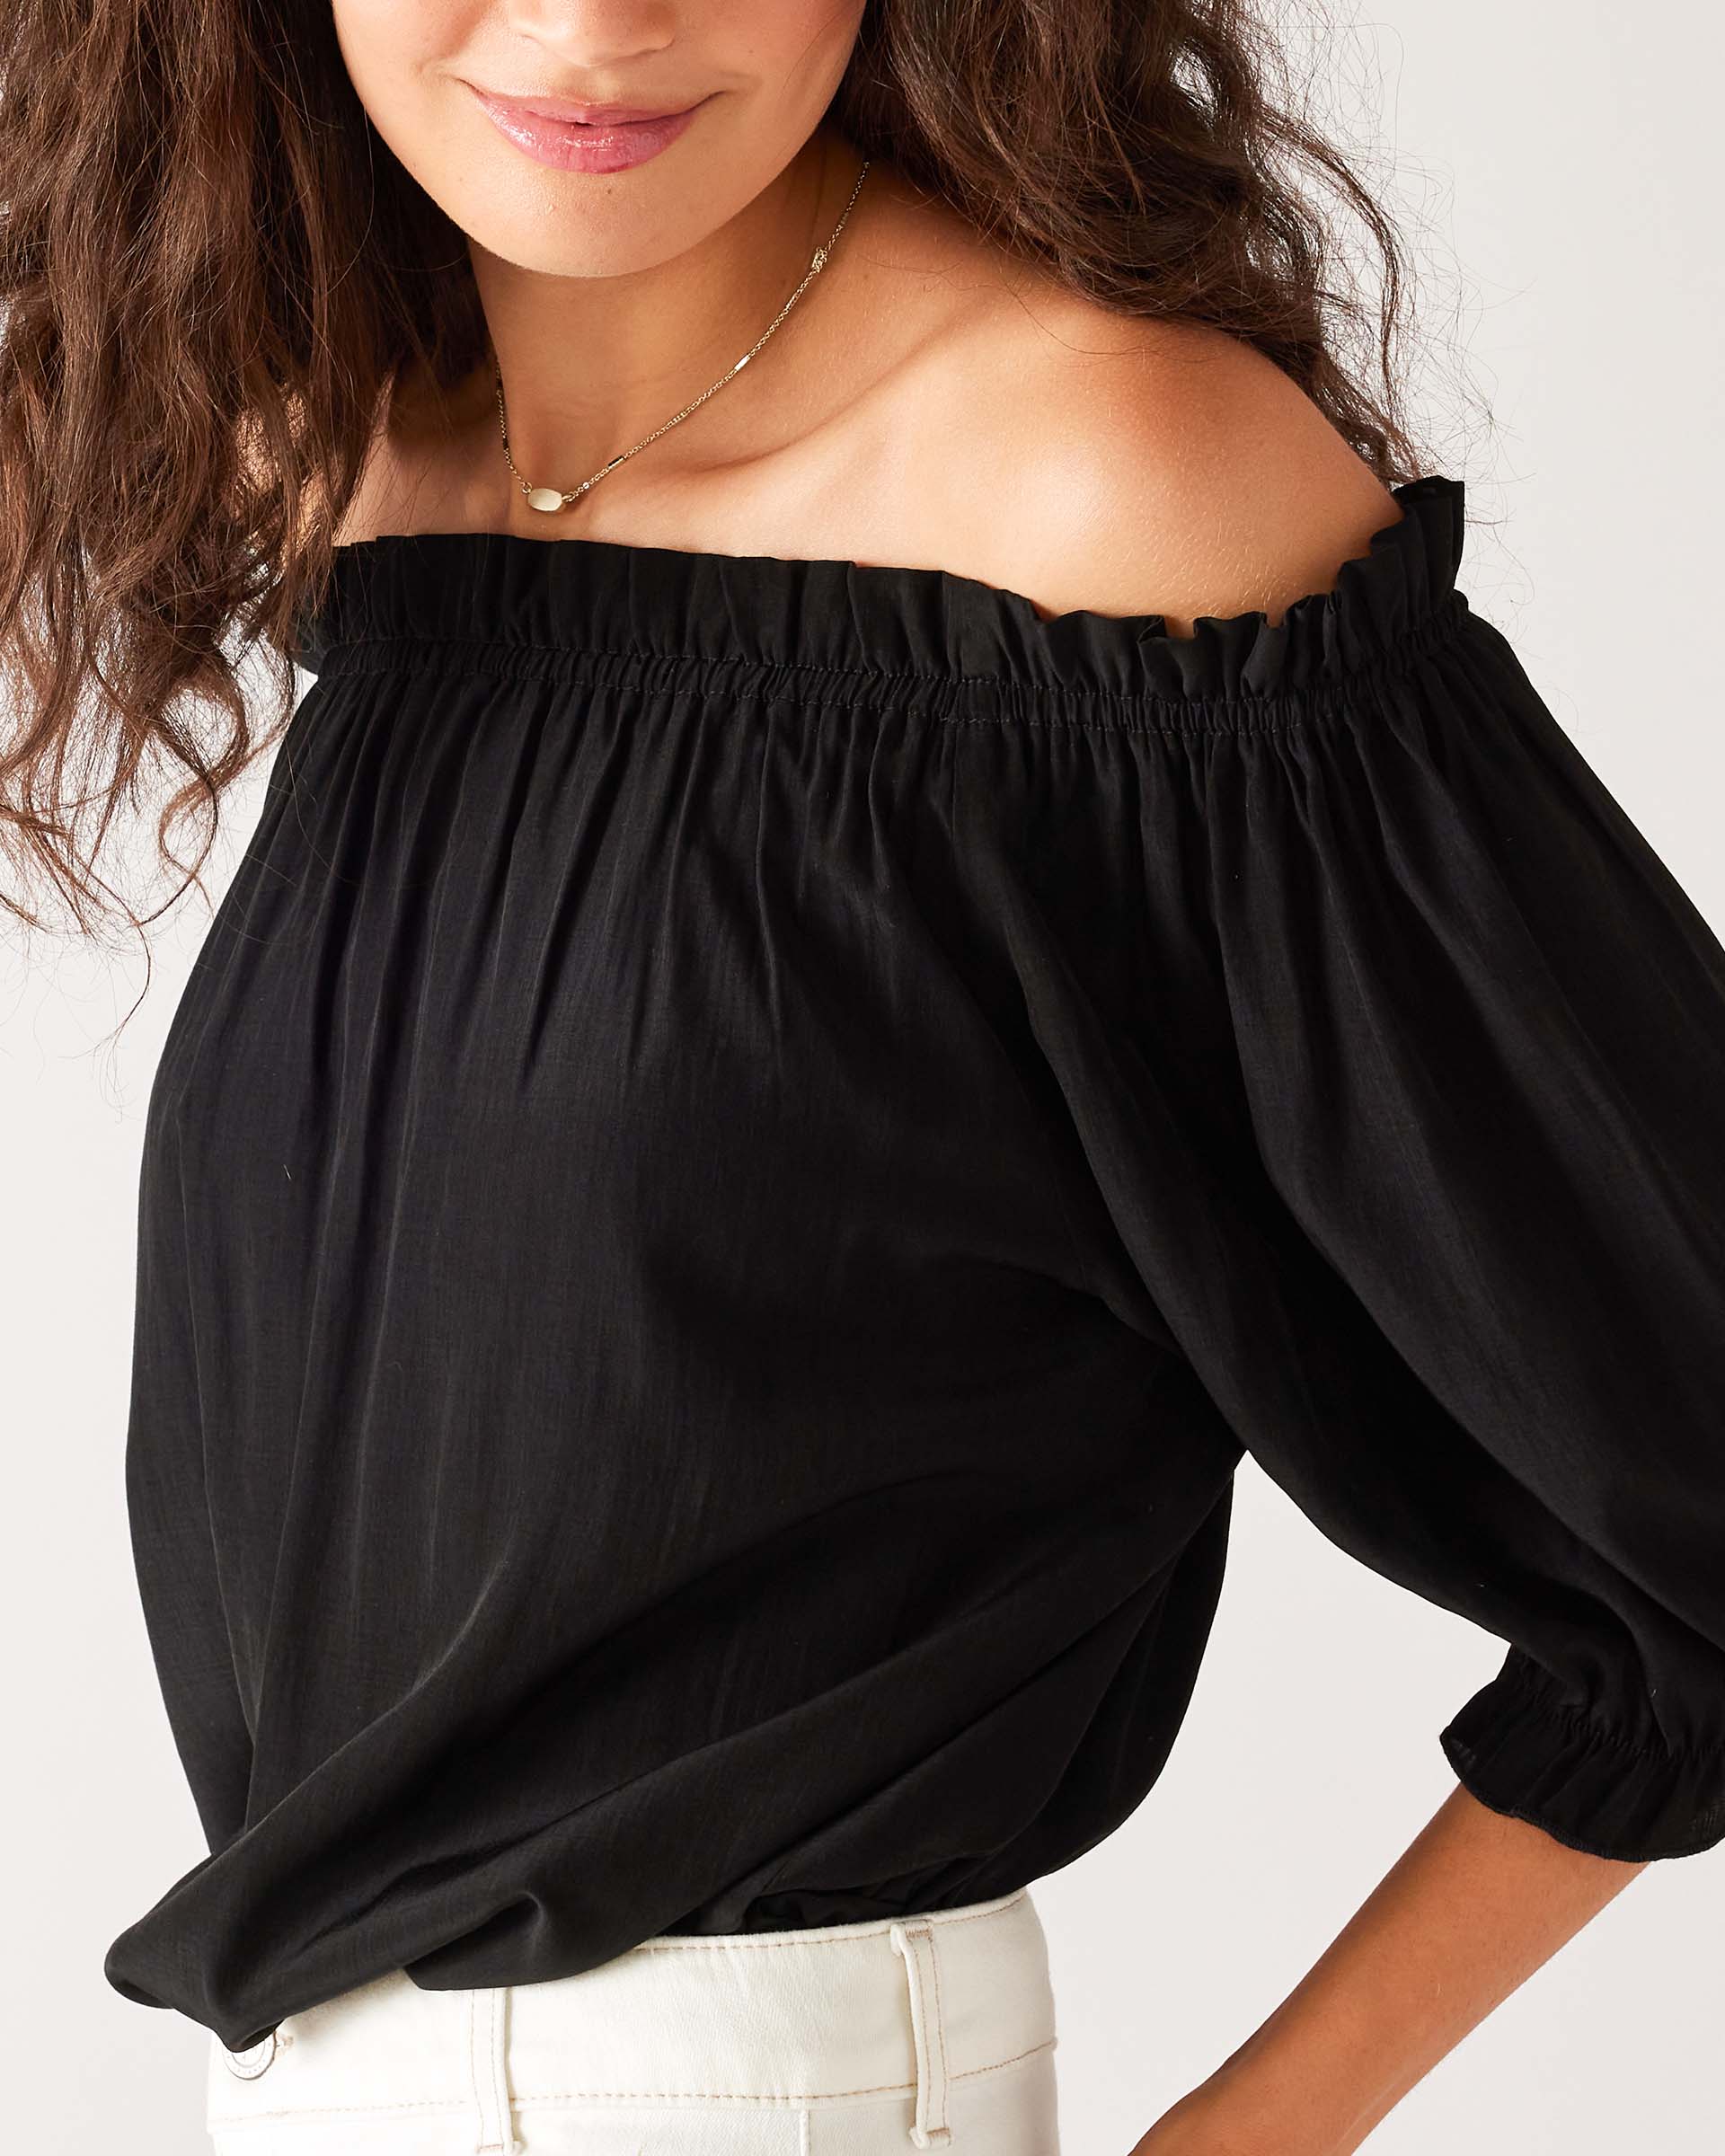 Women's Lightweight Relaxed Black Blouse Side View